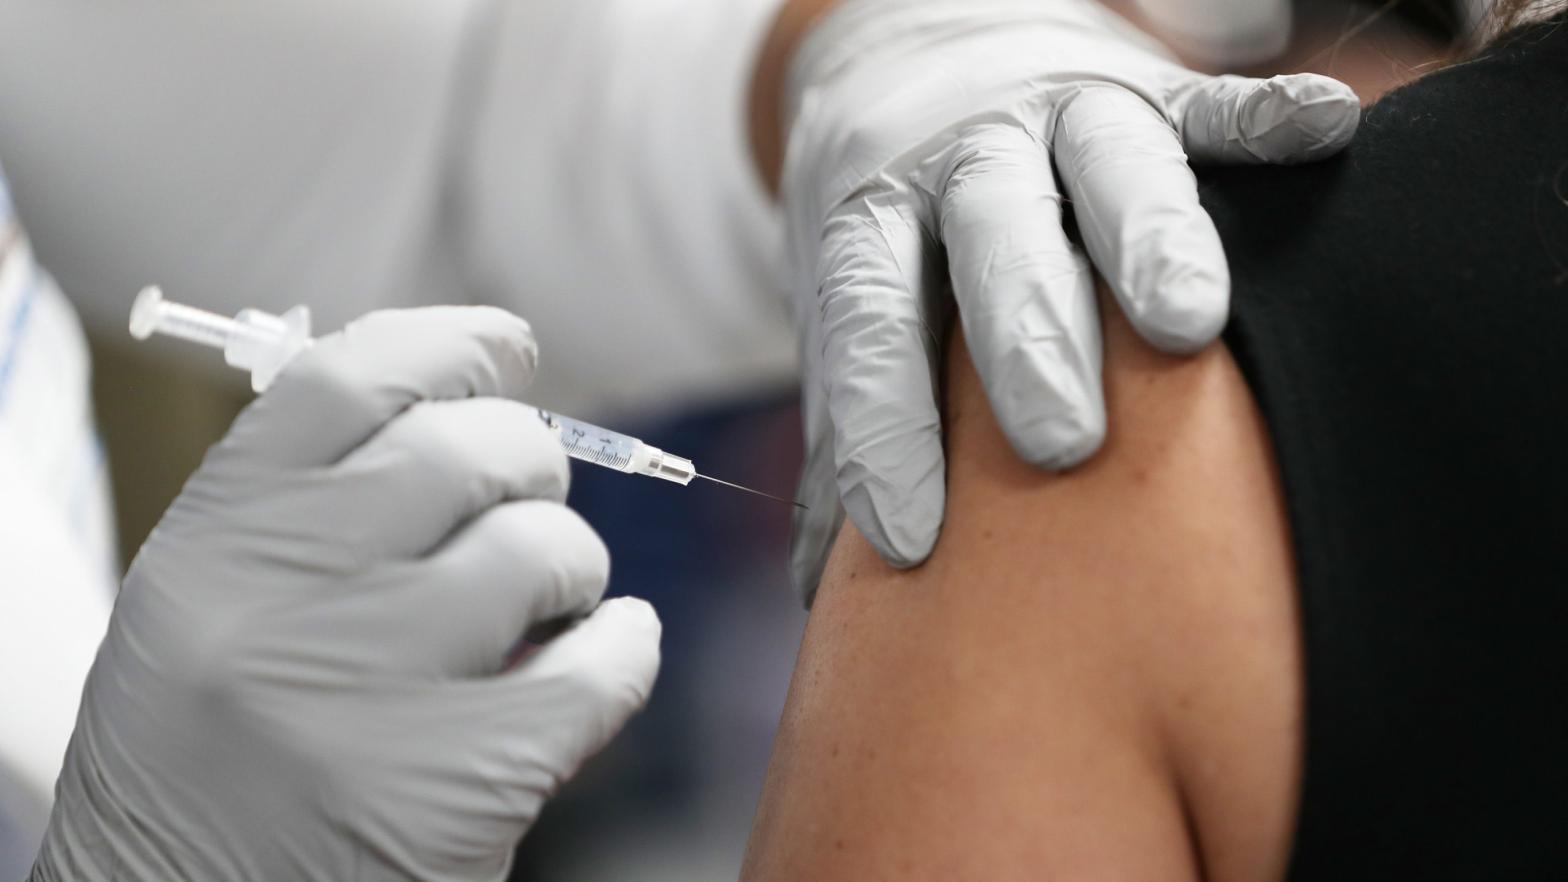 A health care worker receiving the Pfizer-BioNtech covid-19 vaccine at the Jackson Memorial Hospital on December 15, 2020, in Miami, Florida. (Photo: Joe Raedle, Getty Images)